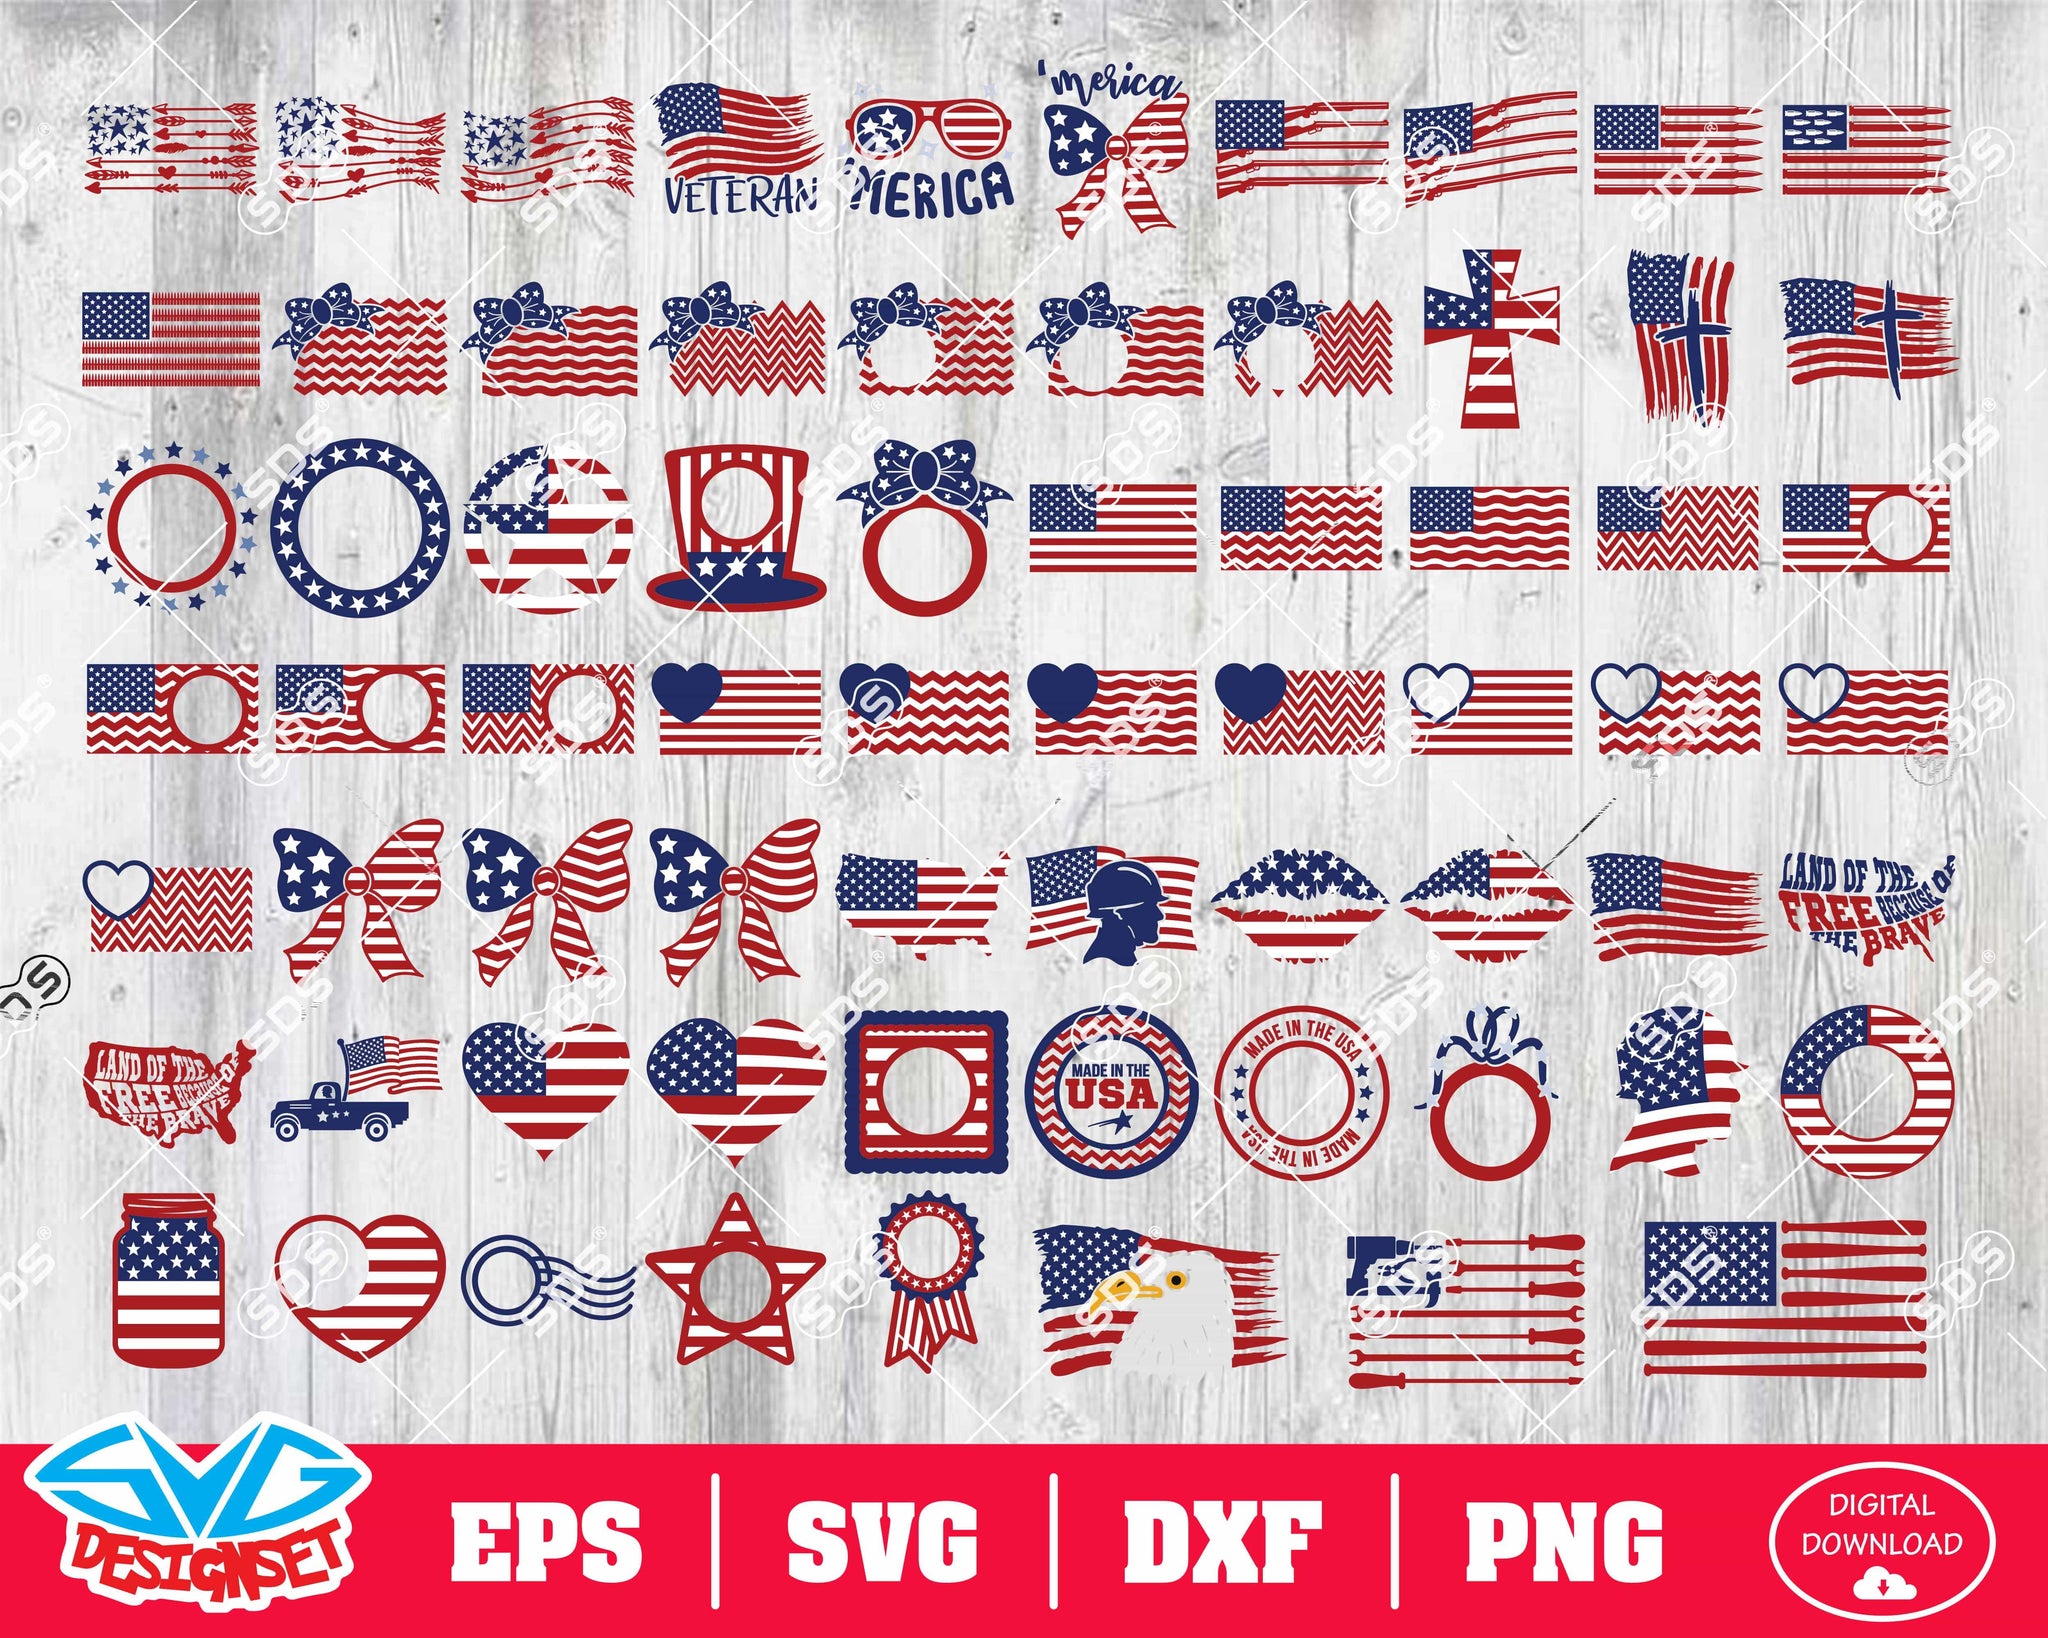 US Flag Bundle Svg, Dxf, Eps, Png, Clipart, Silhouette and Cutfiles - SVGDesignSets